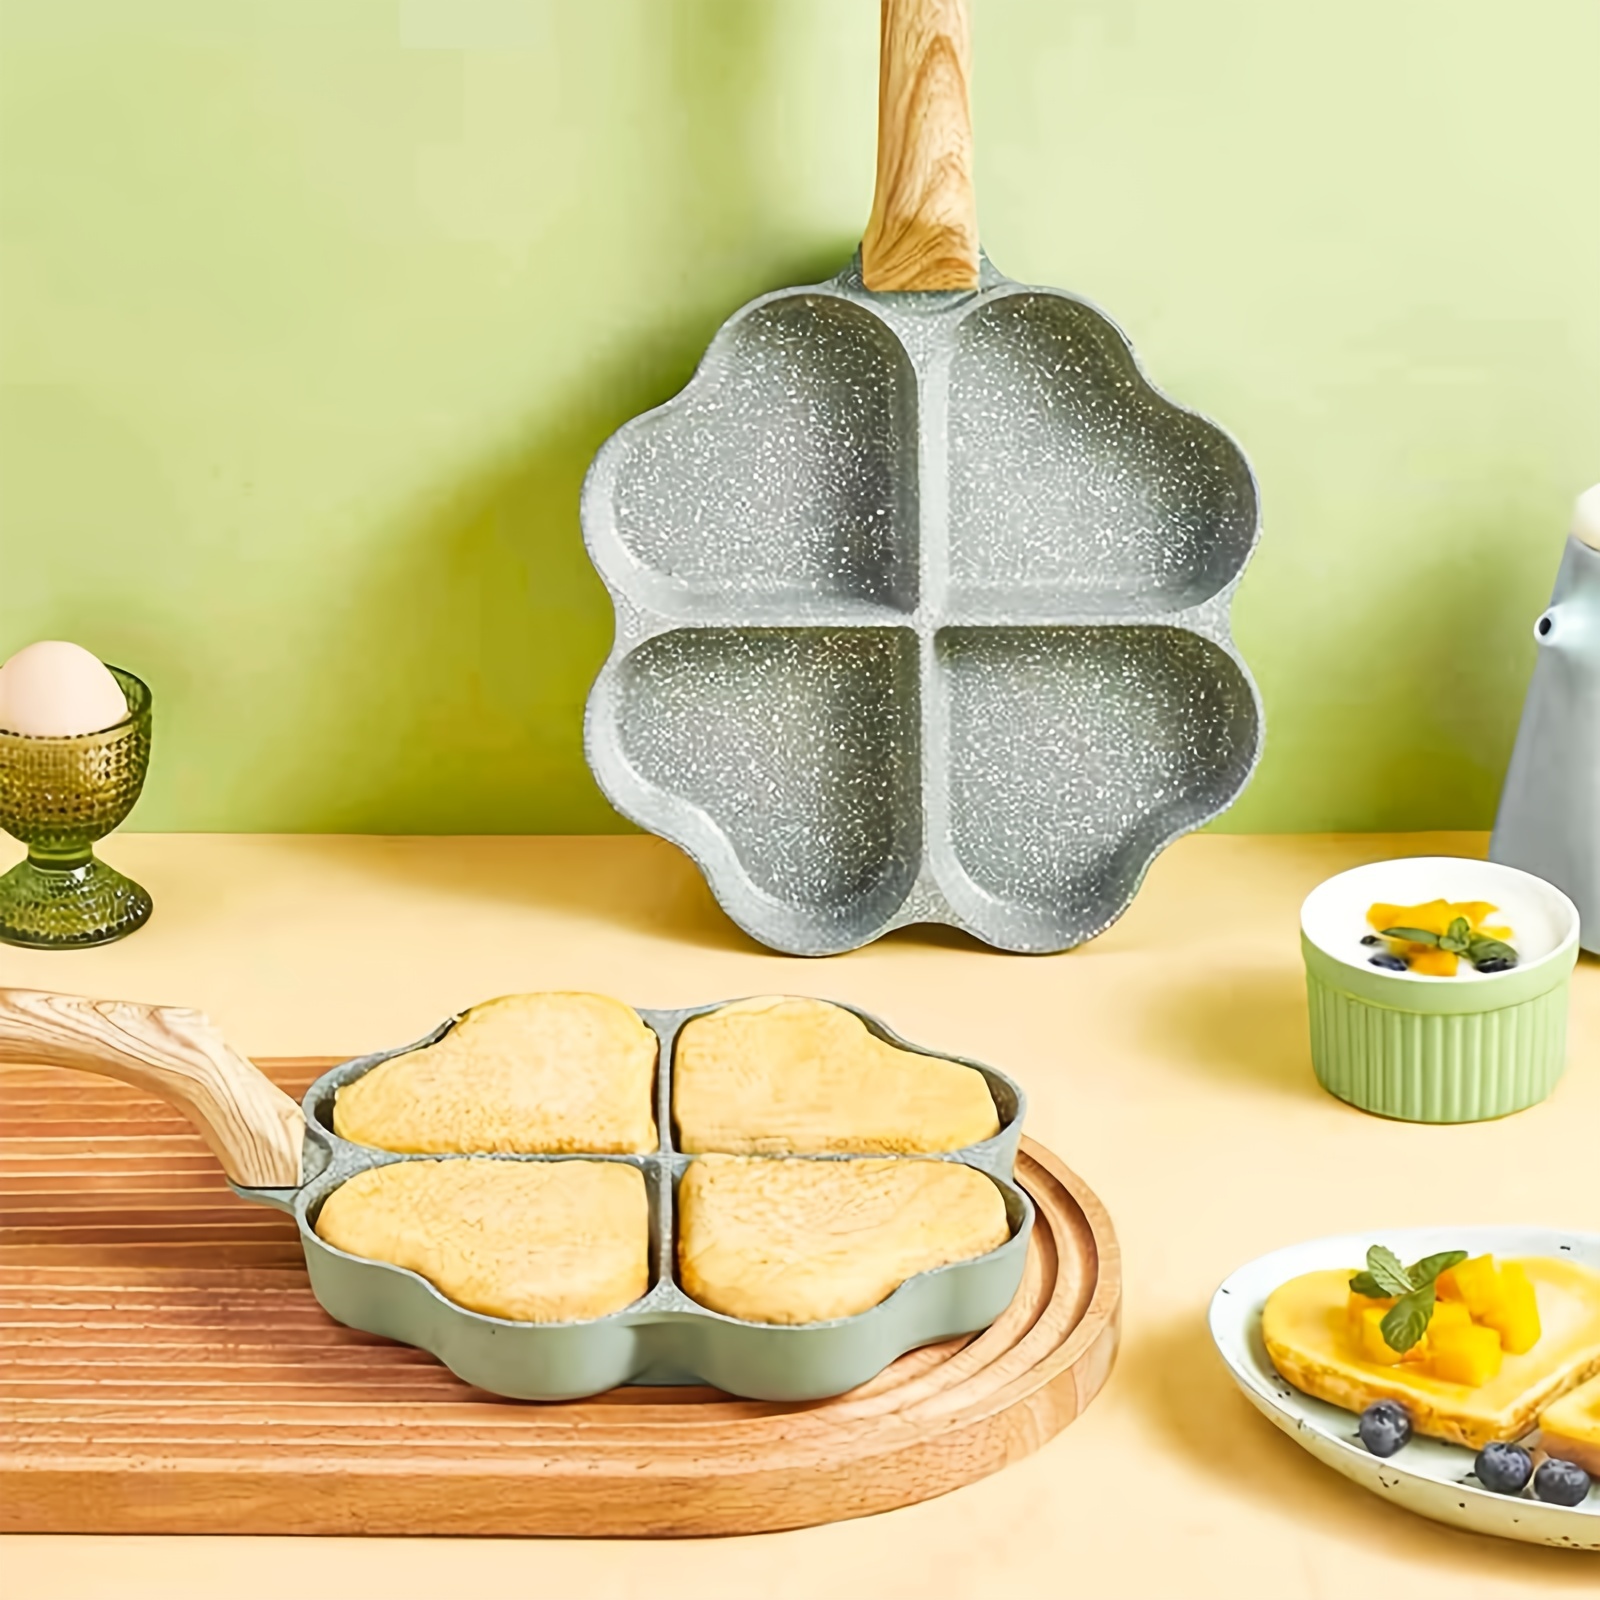 Fry Pan For Egg, Non Stick Ham Pancake Maker, Egg Burger Pan With Wooden  Handle, 4 Holes, For Induction Cooker Gas Stove